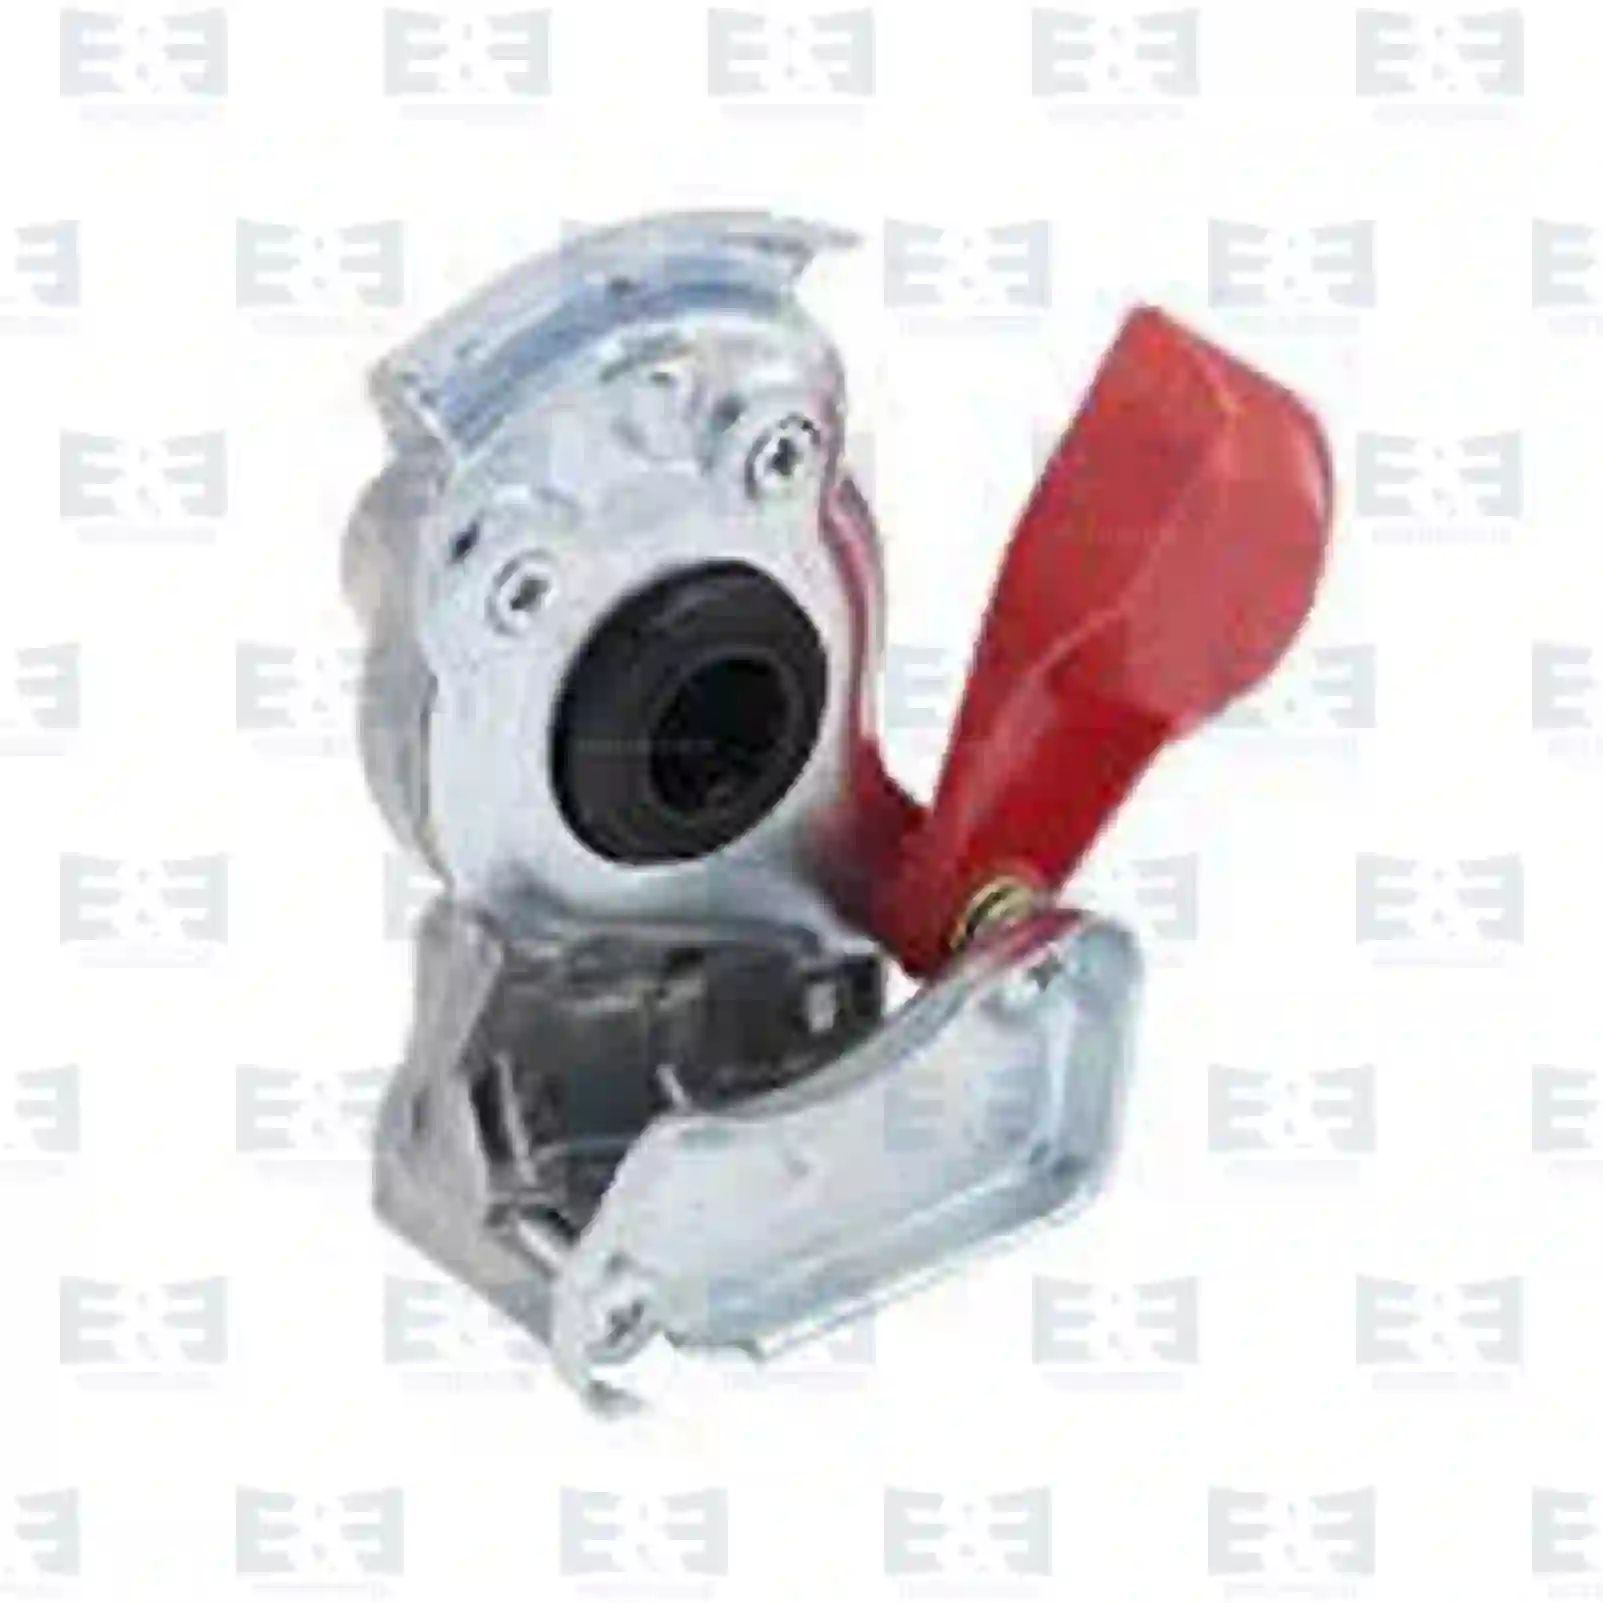 Compressed Air Palm coupling, automatic shutter, red lid, EE No 2E2286389 ,  oem no:0109915, 109915, 1427369, 04680365, 61577724, 1599819, 04680365, 4680365, 61577724, 77408, 81512206024, 0004293530, 4522002110, 5000440154, 1504064, 1505064 E&E Truck Spare Parts | Truck Spare Parts, Auotomotive Spare Parts